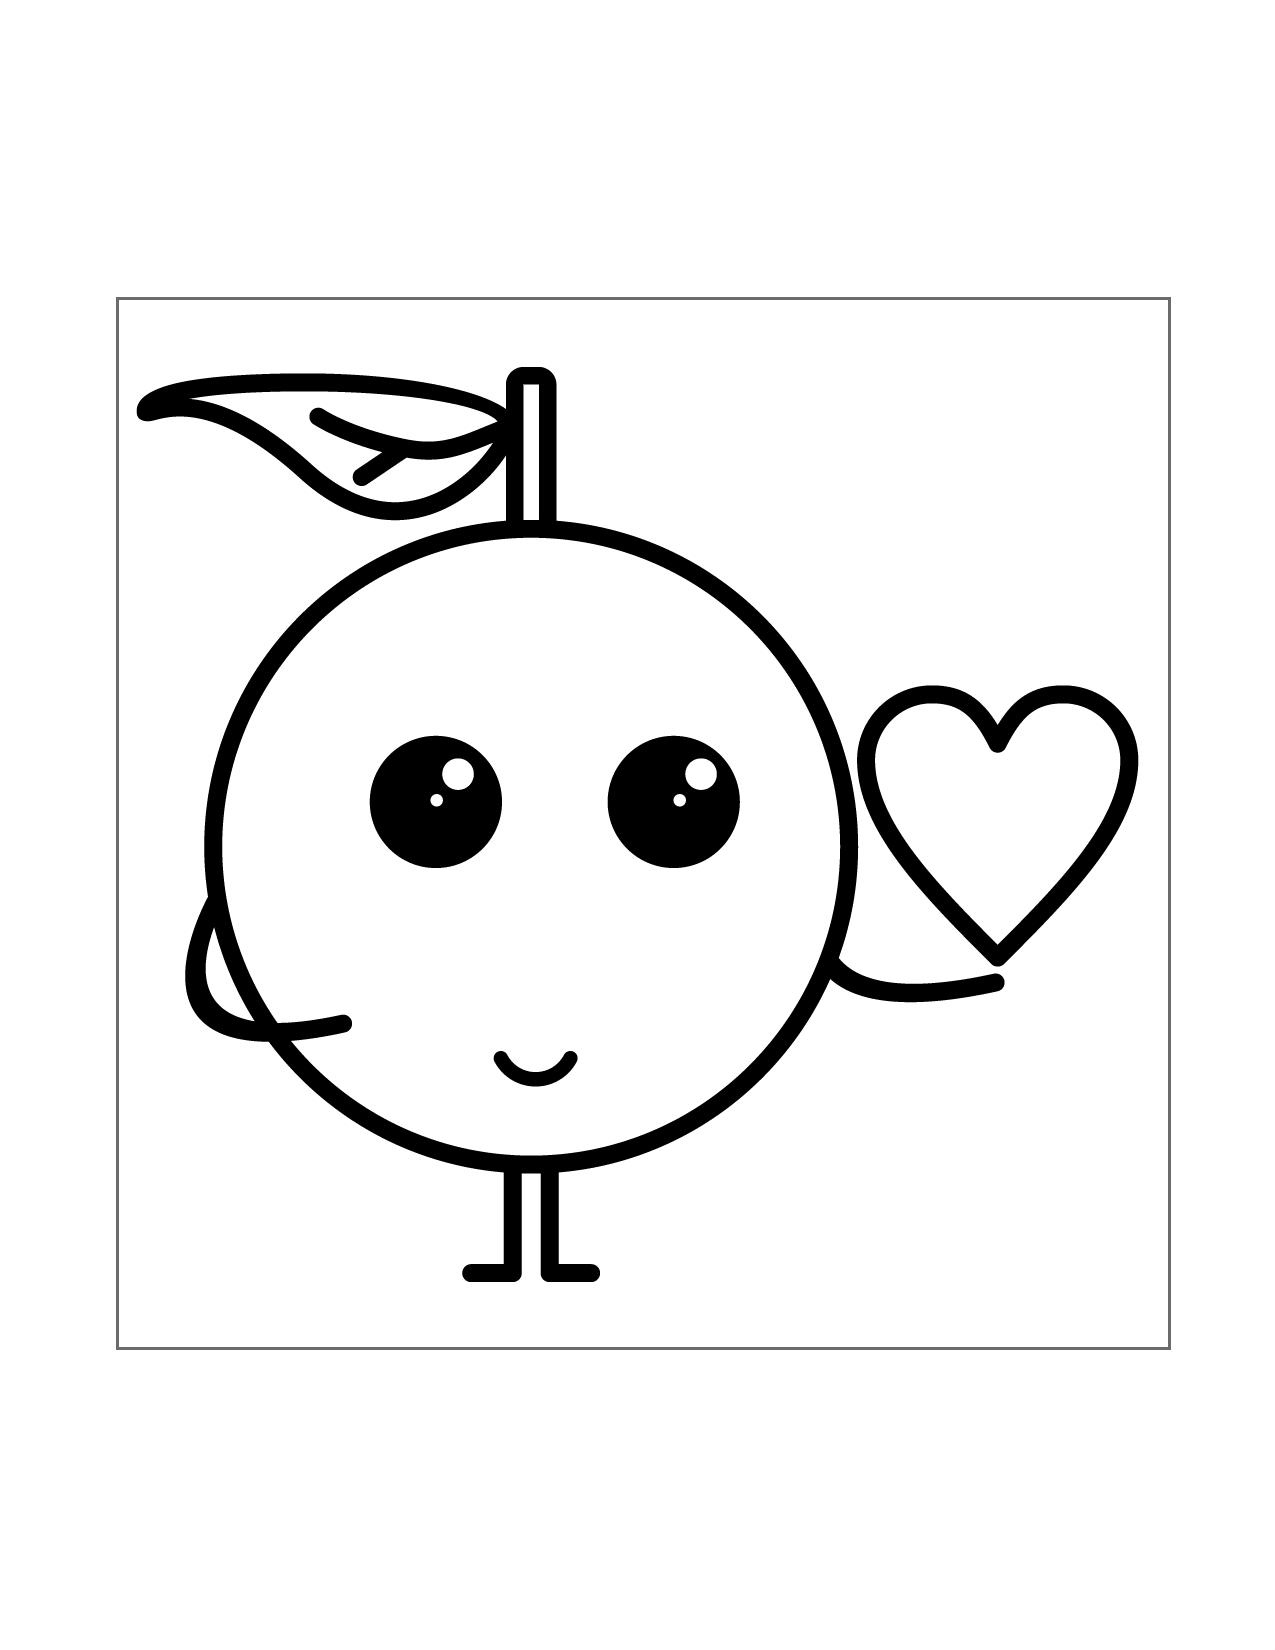 Orange With Heart Coloring Page